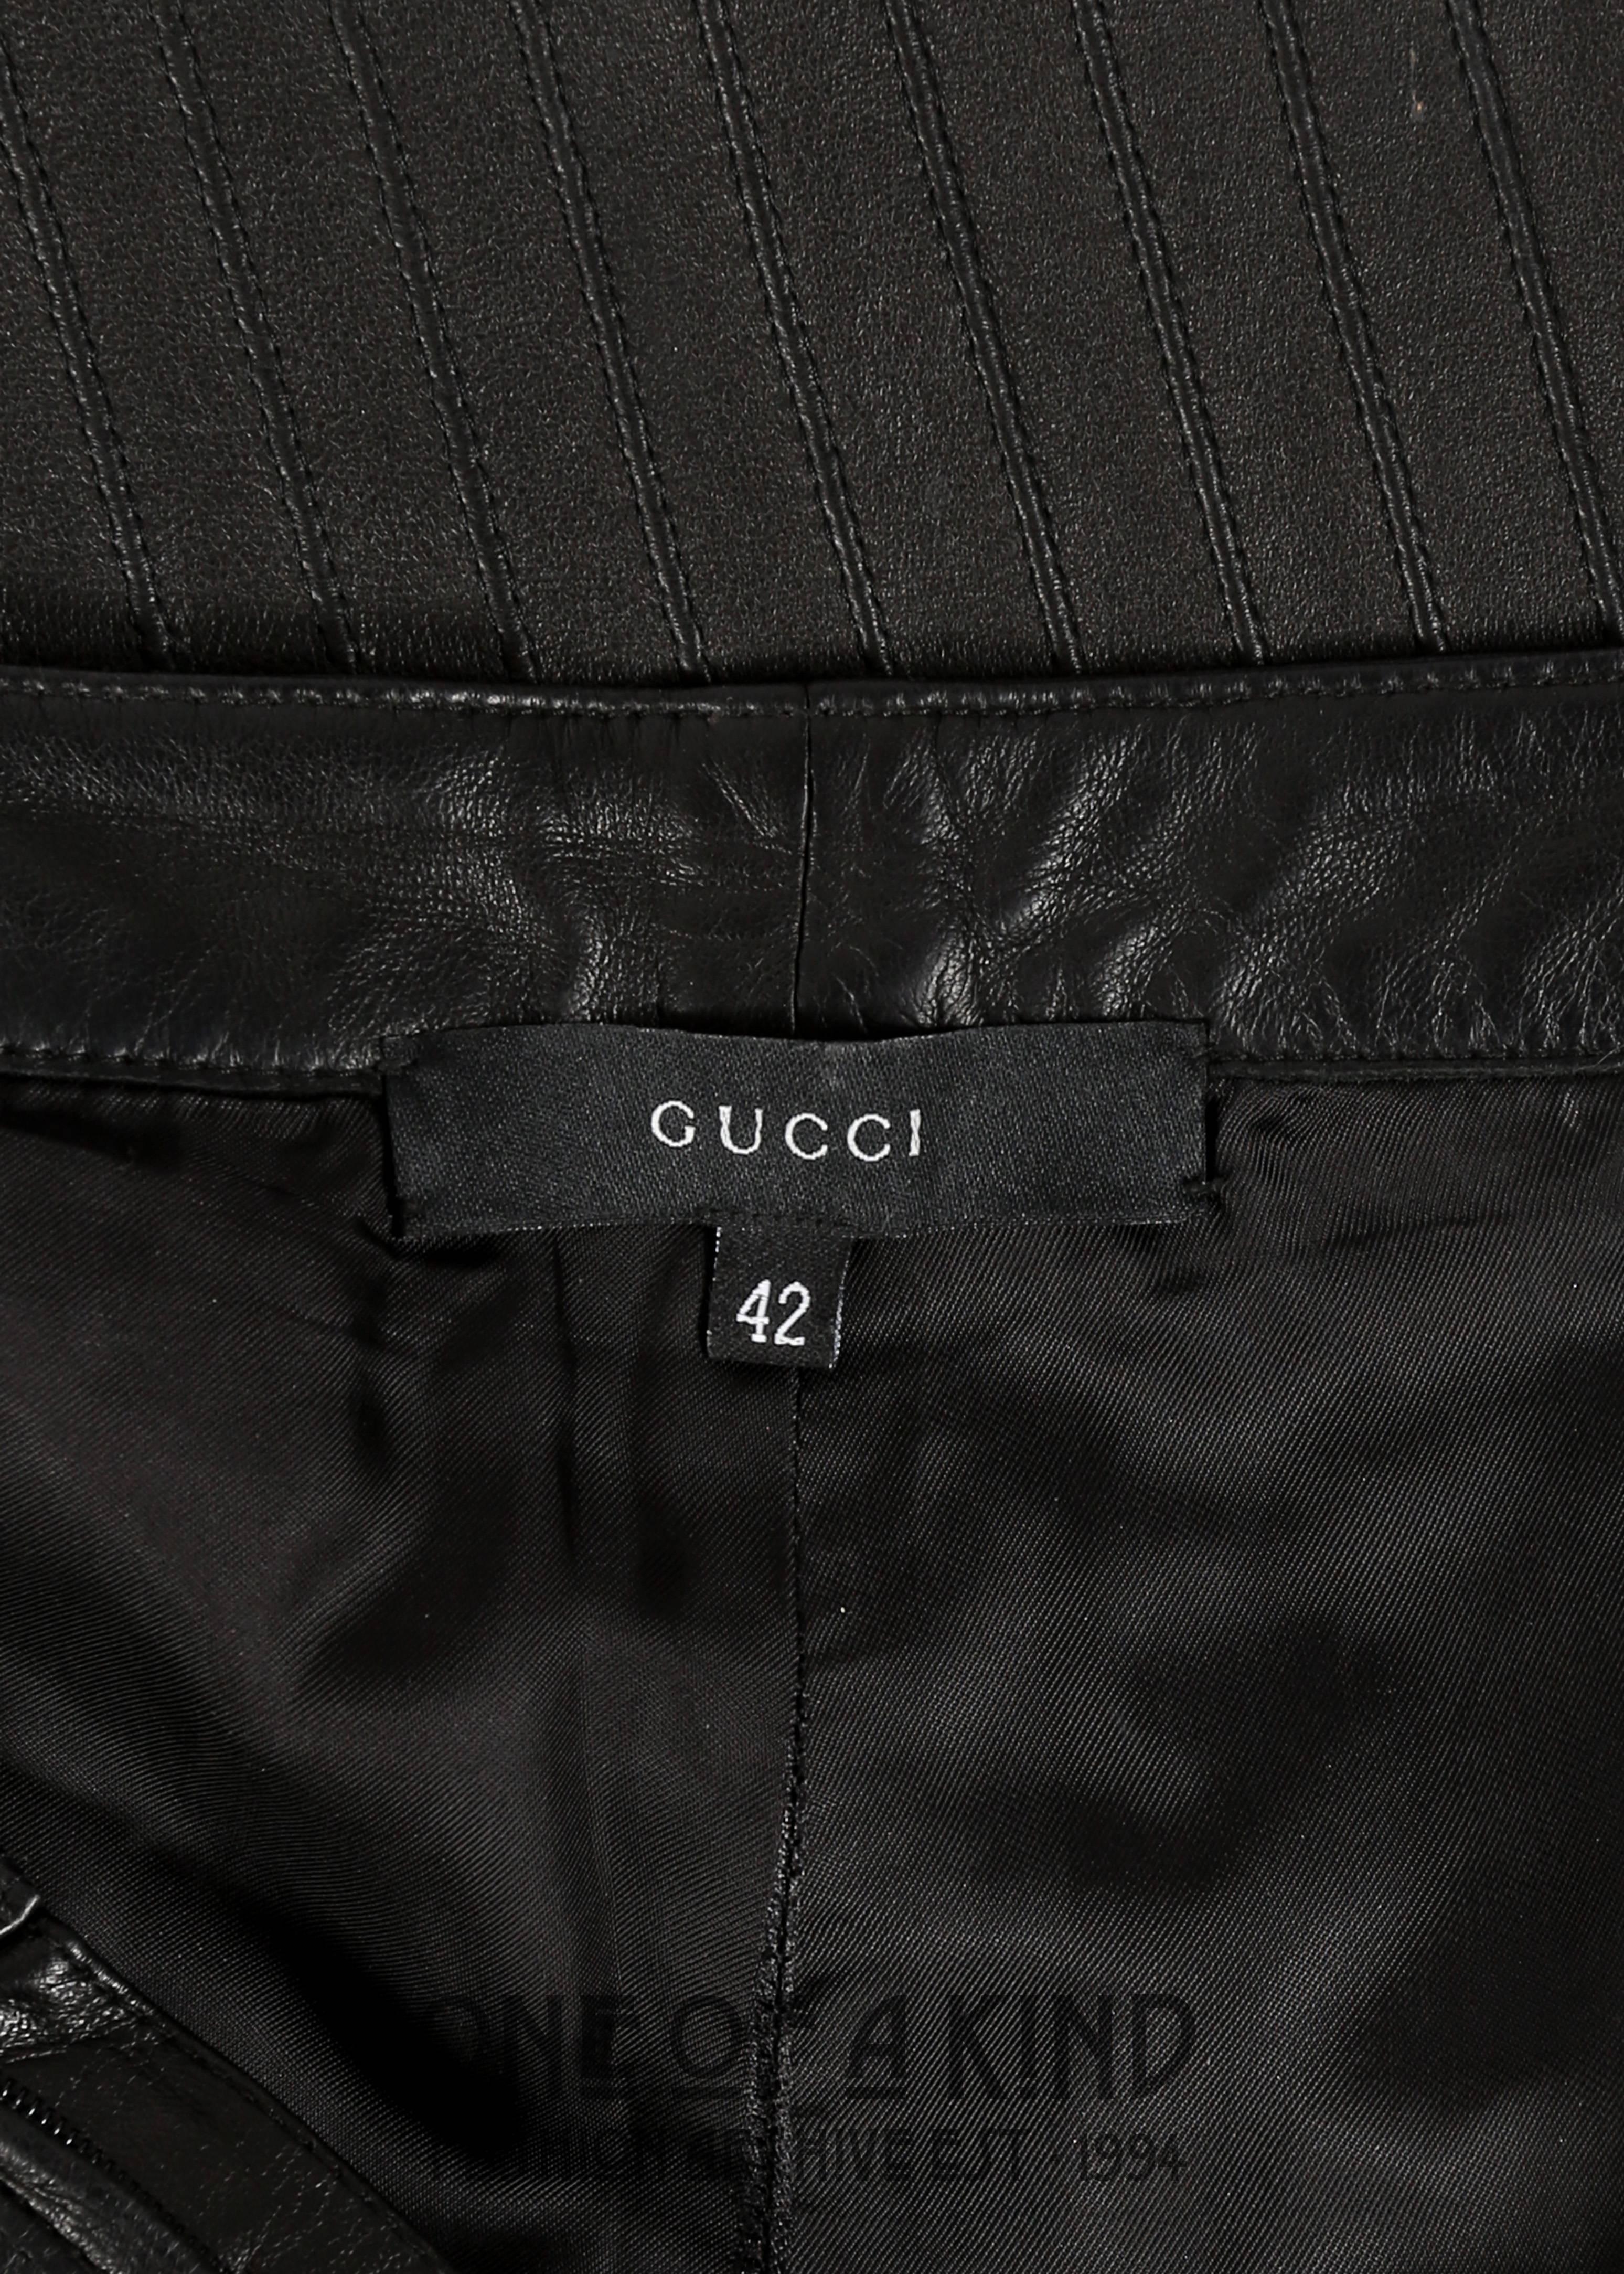 Tom Ford for Gucci Autumn-Winter 1999 black leather flared pintuck pants 1